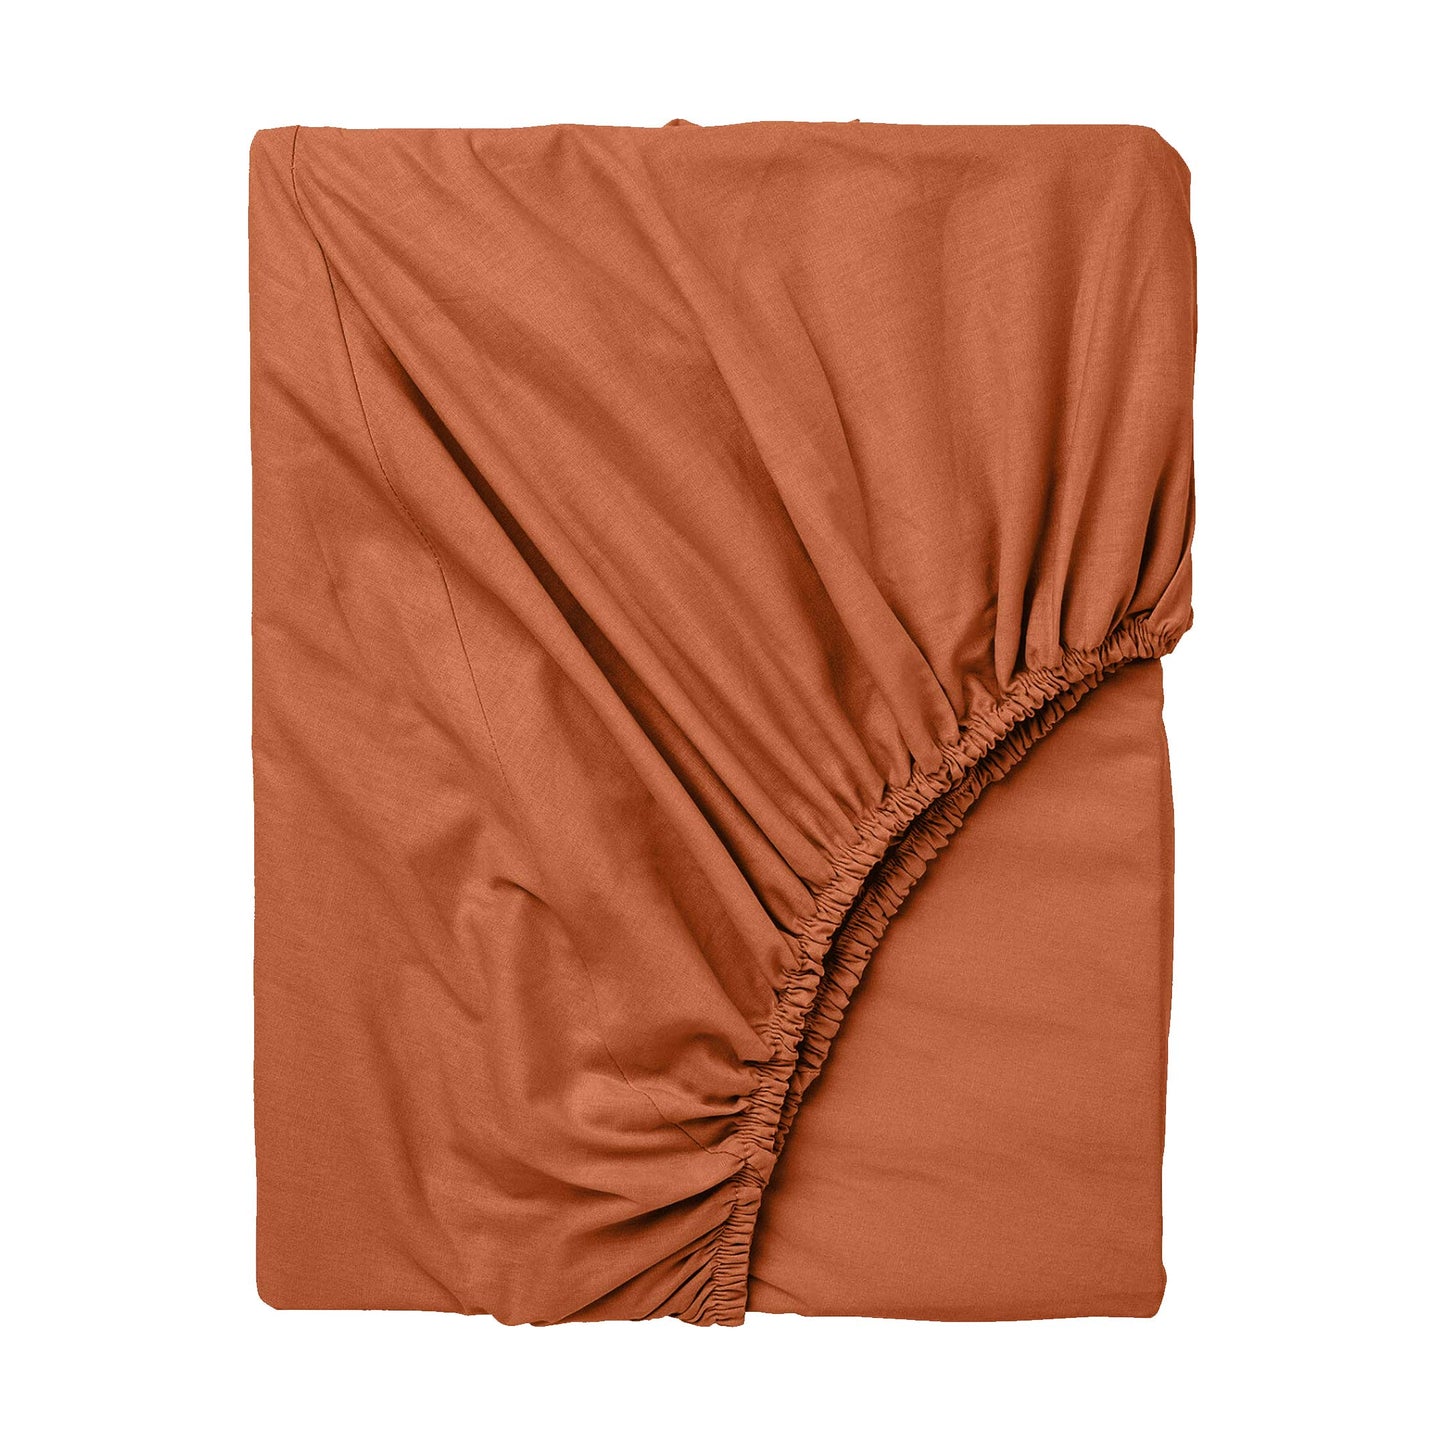 Rust- fitted sheet - king size (3-pcs)